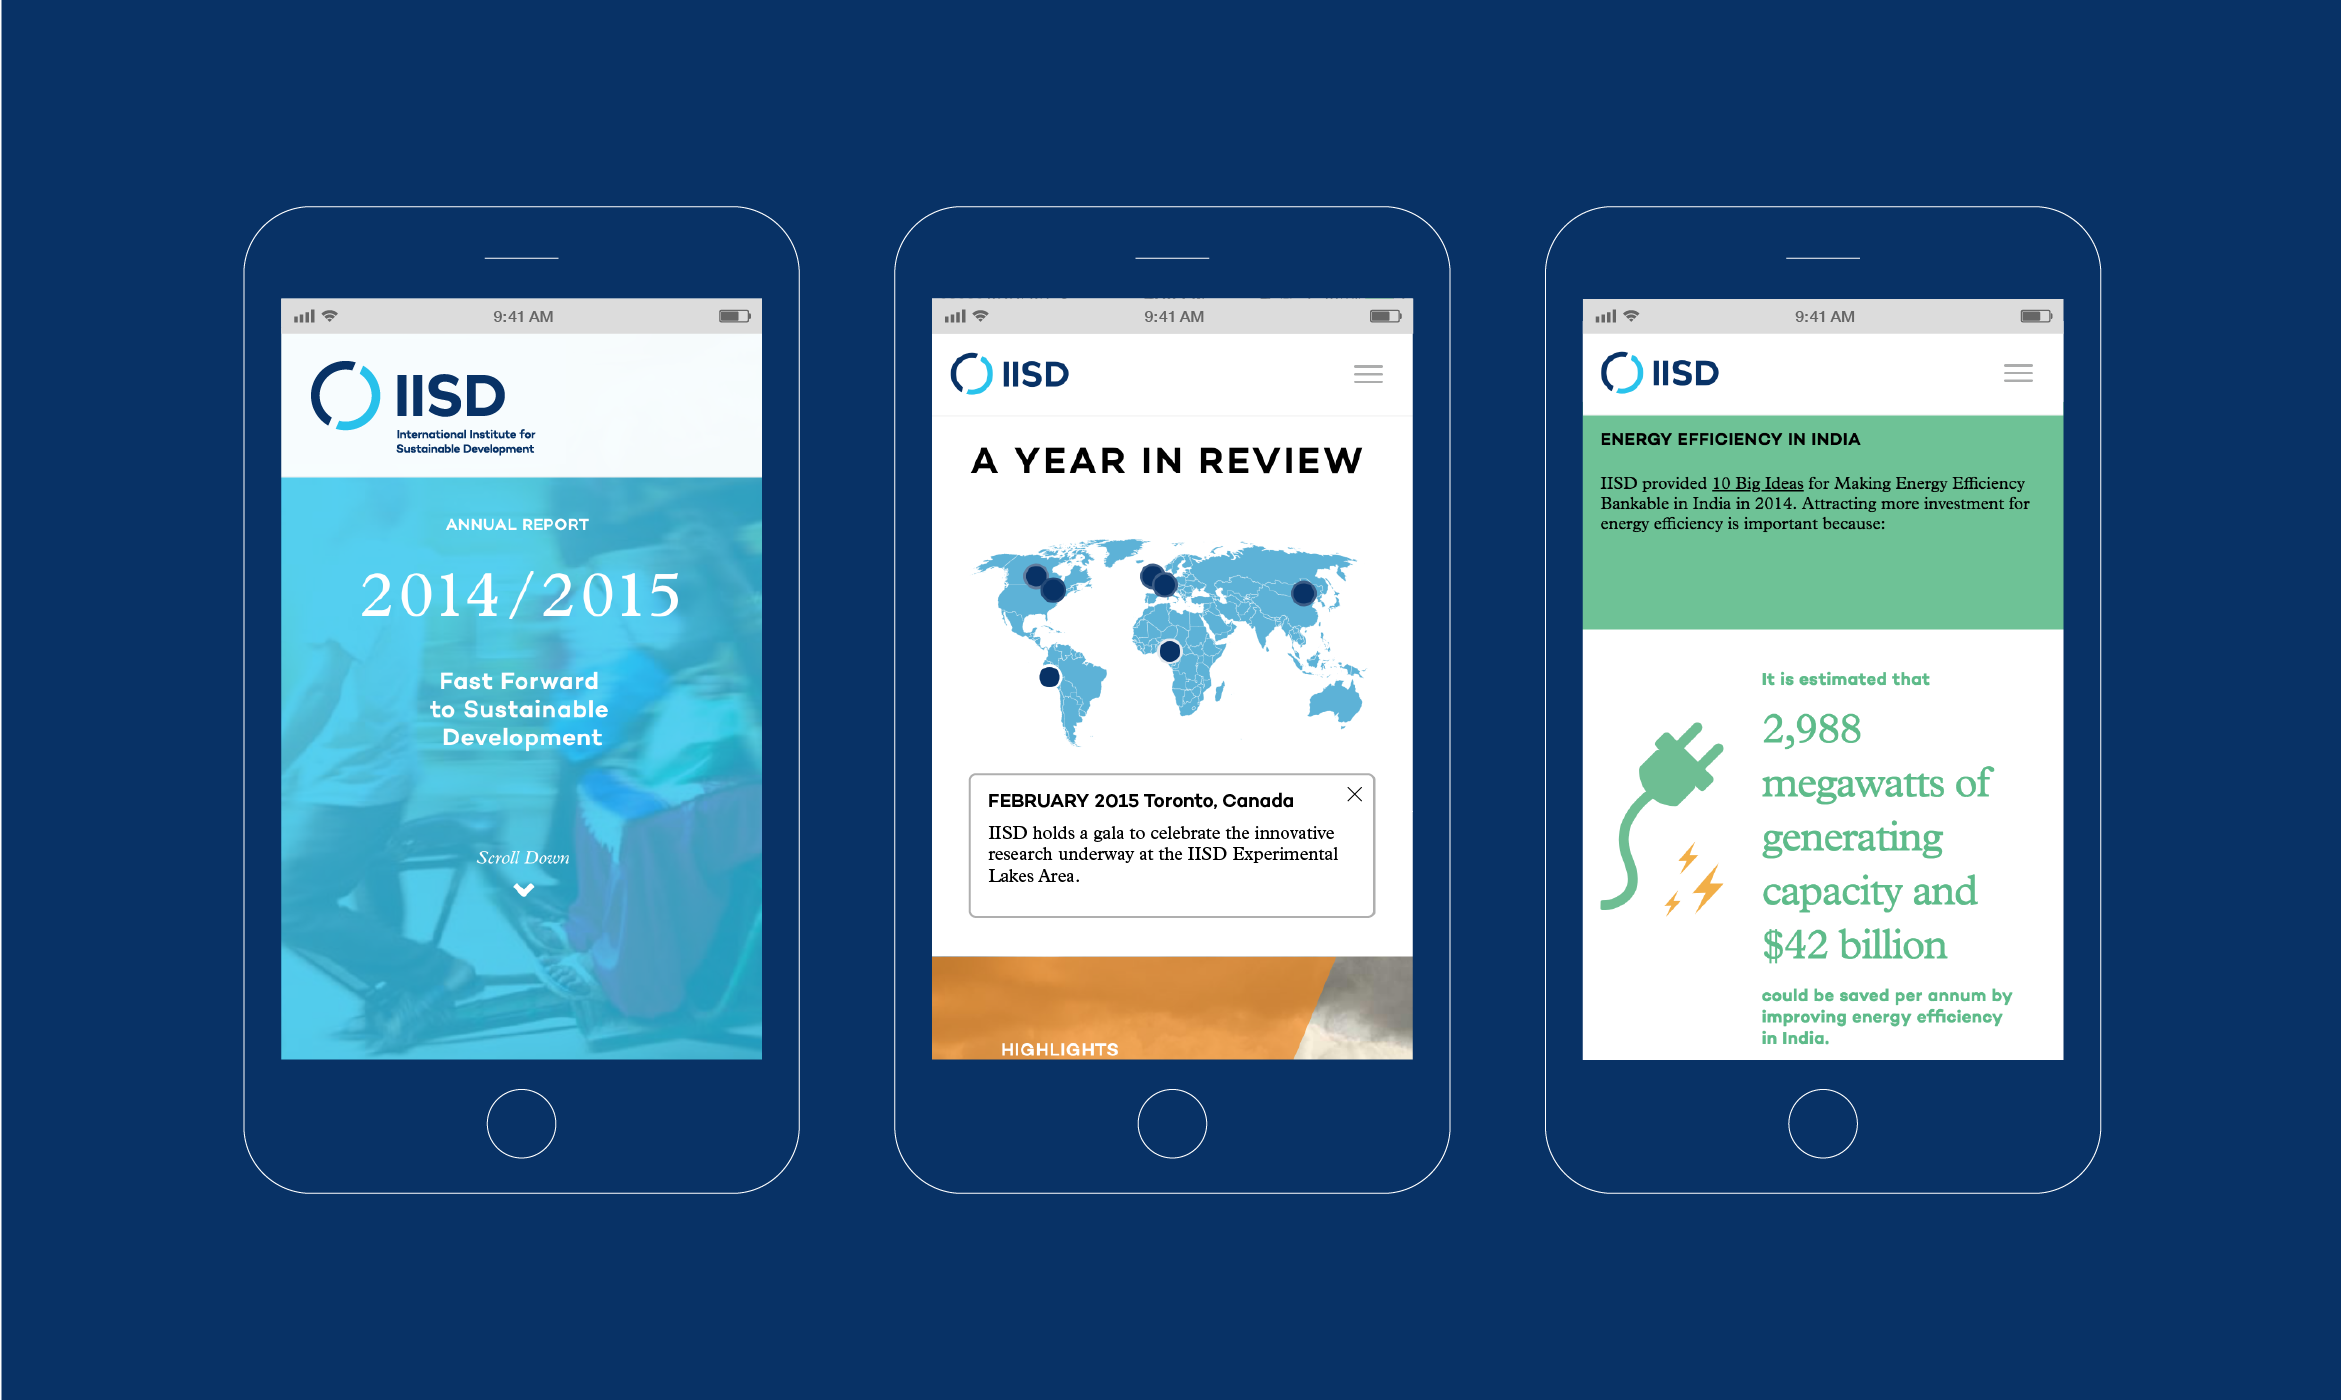 Three mobile phone screens each showing different stages of IISD's Annual Report webpage as it is scrolled down.